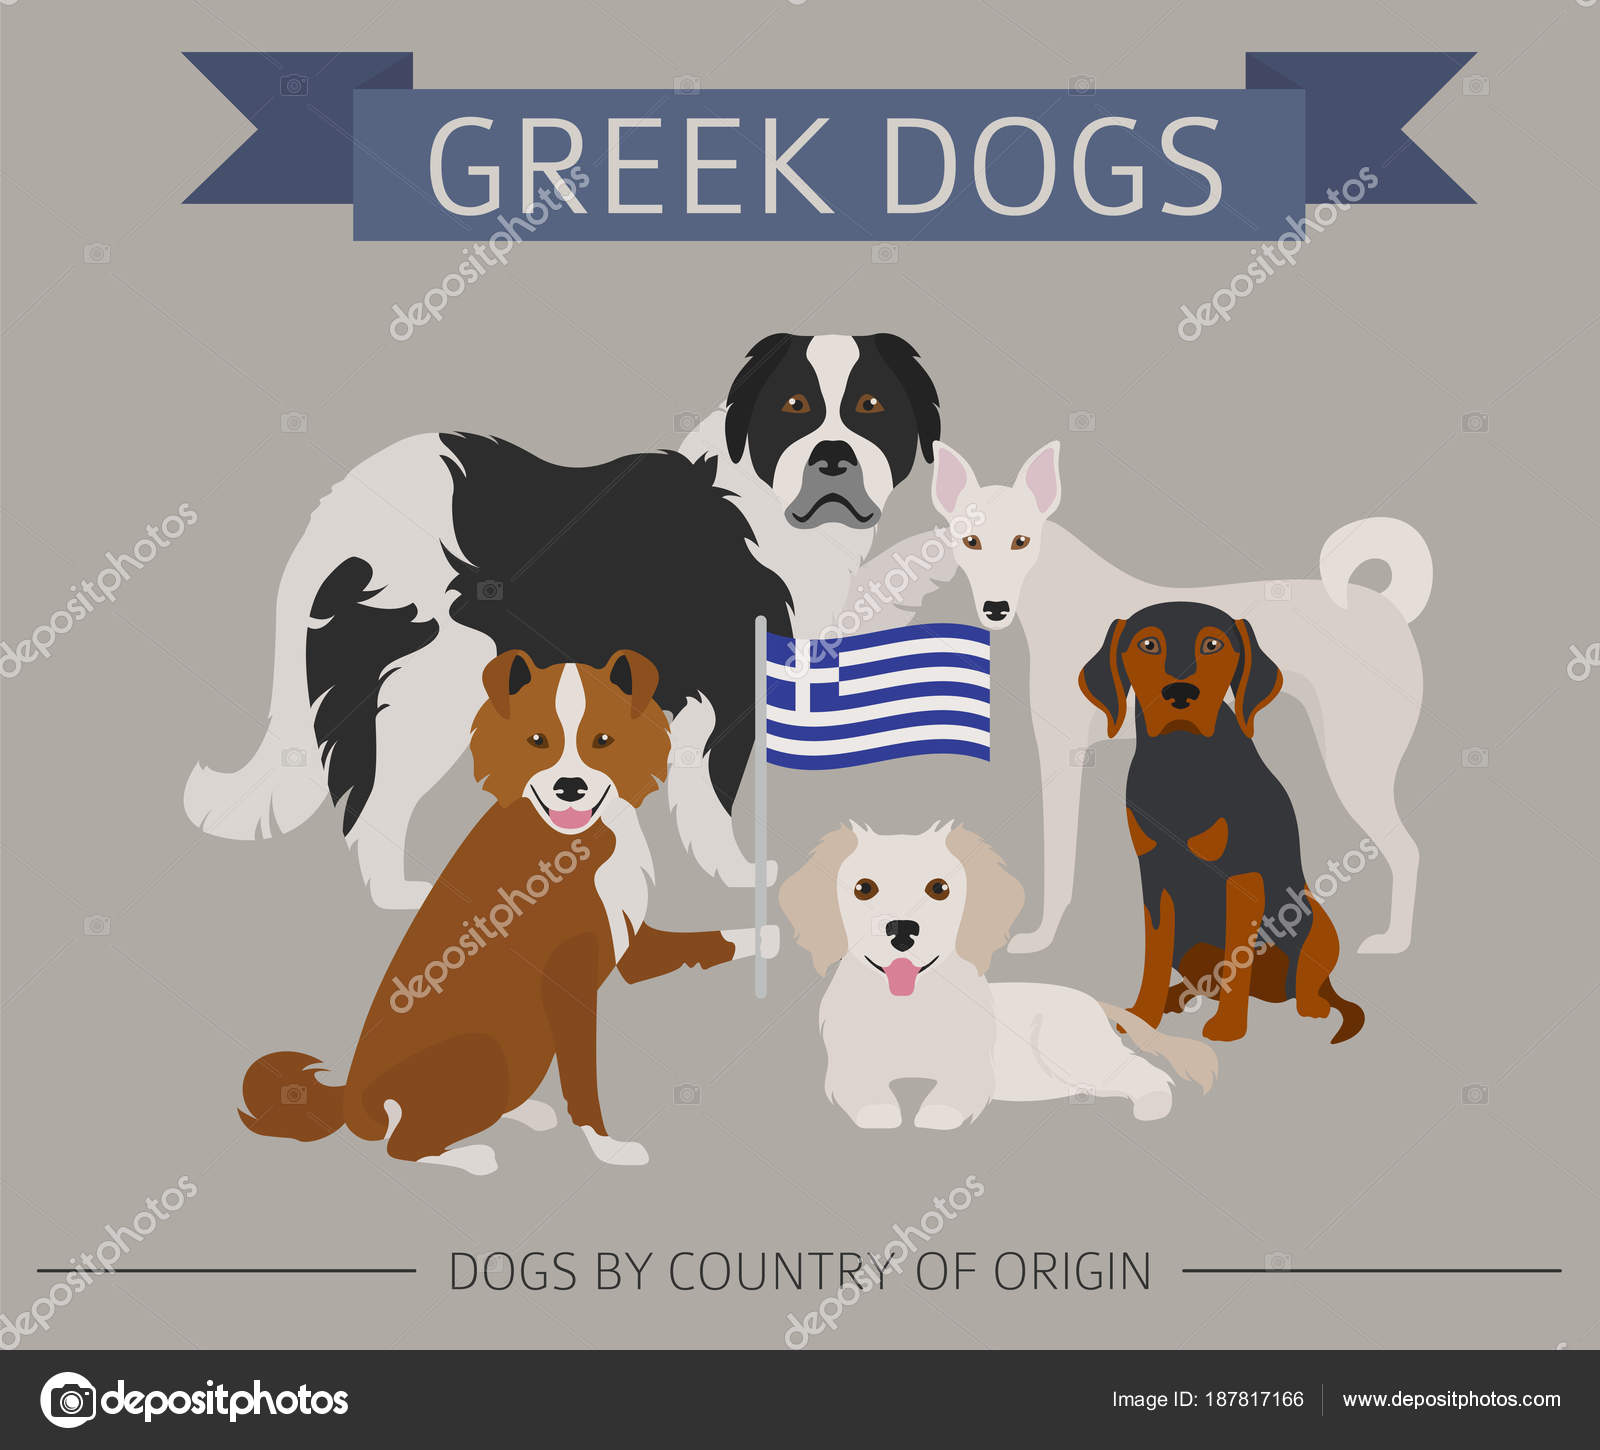 Dogs By Country Of Origin Greek Dog Breeds Infographic Templat Stock Vector C A7880s 187817166